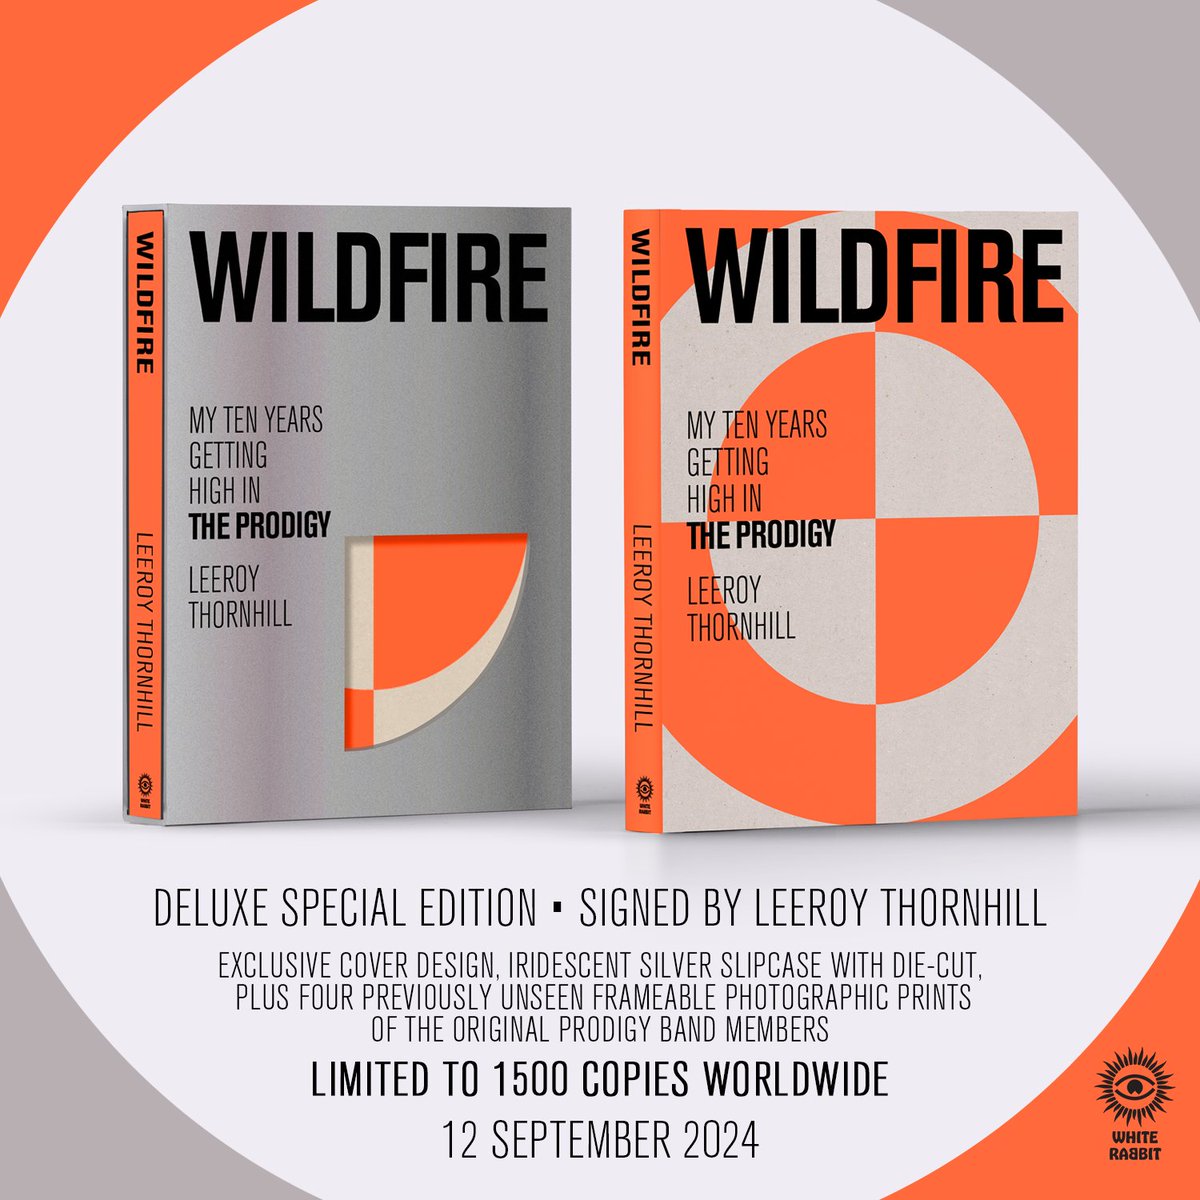 Im pleased to announce the release of my book Wildfire. An insight into my time with The Prodigy with a collection of photos from my personal collection and a selection of short stories of our time on the road. Now available for pre order. geni.us/WildfireLT